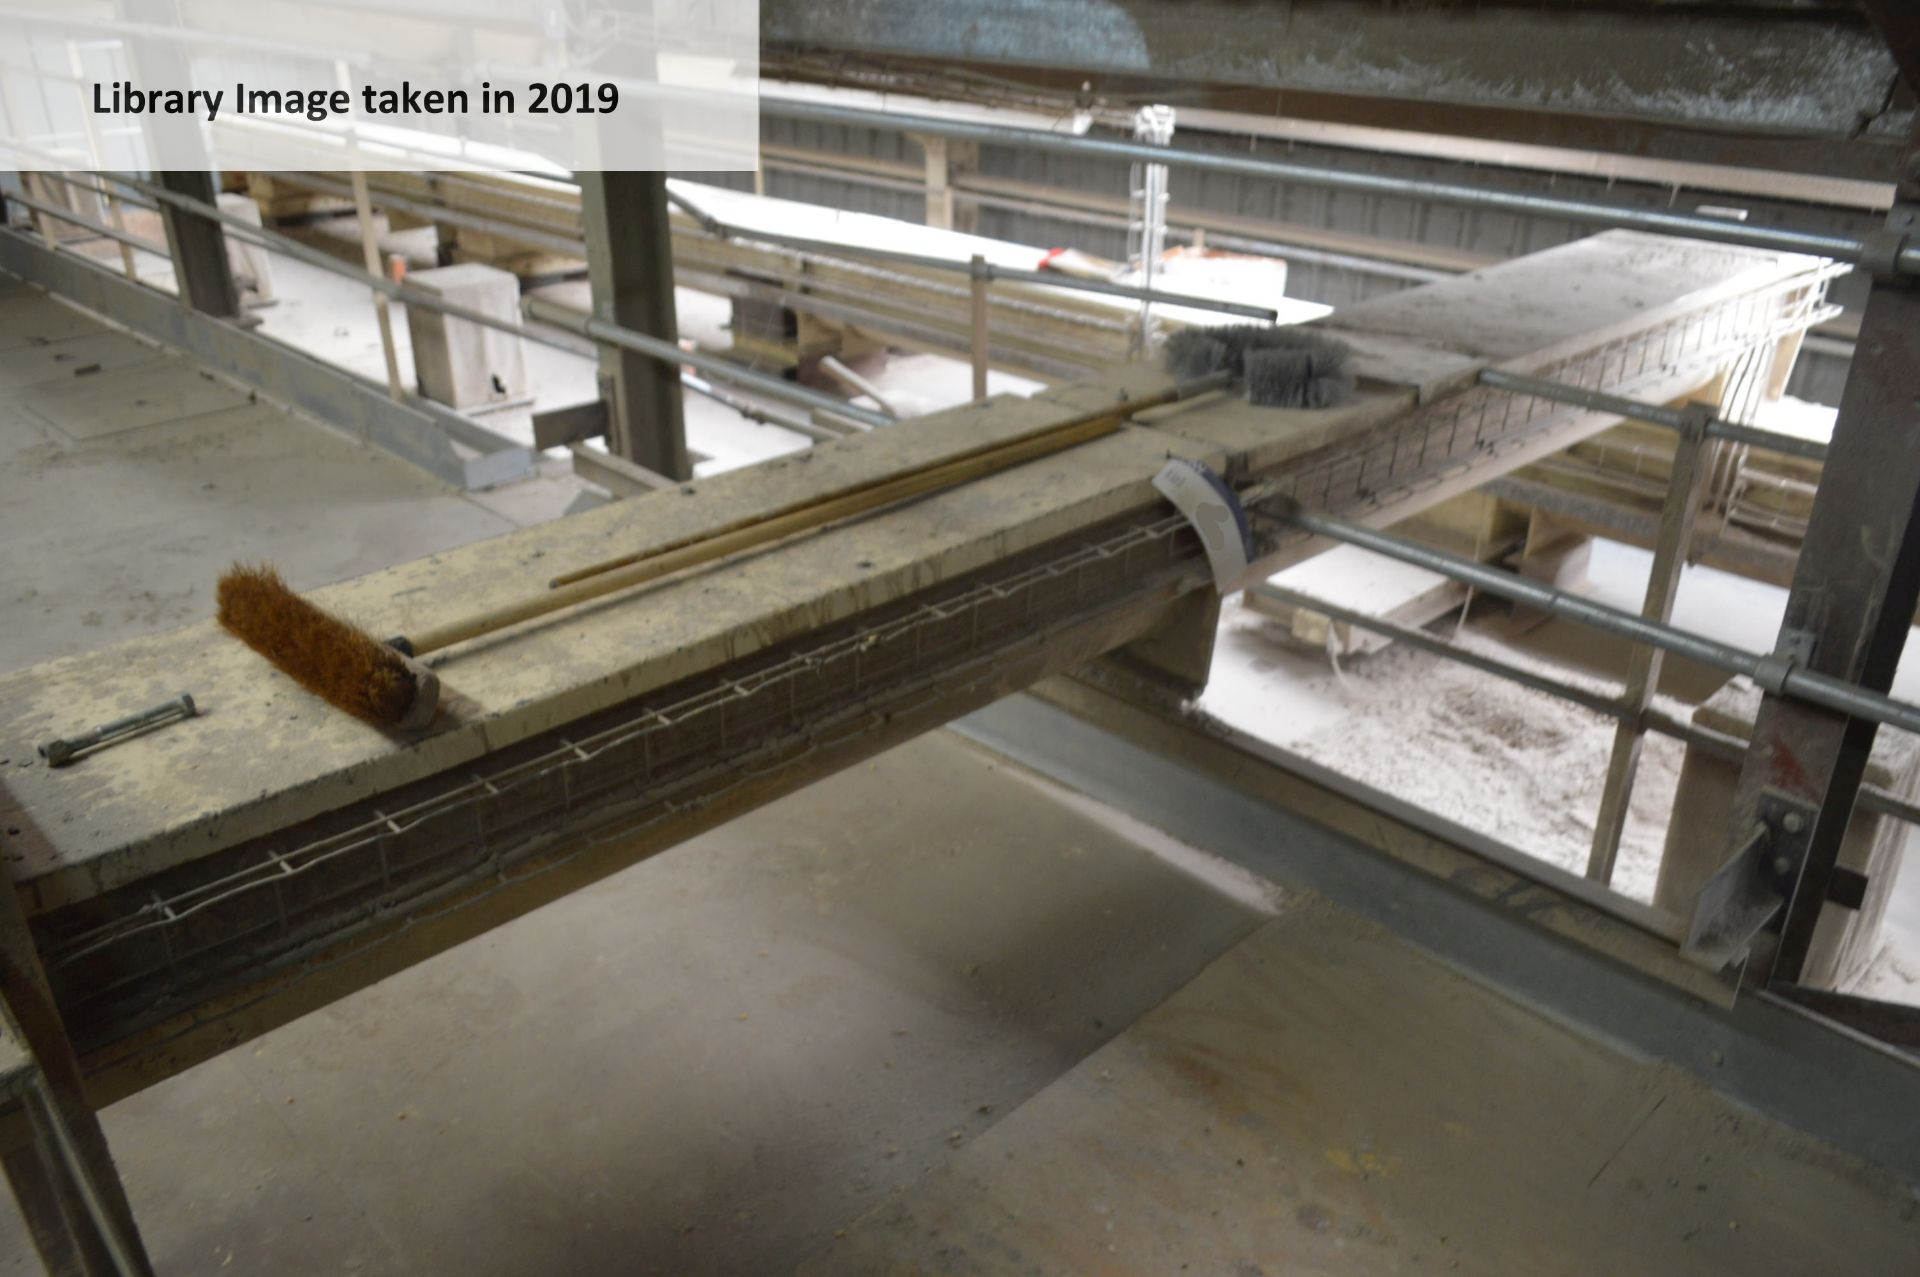 (KDM) Guttridge 300mm SCREW CONVEYOR, serial no. 0570616-1-1 C1, year of manufacture 2011, approx.